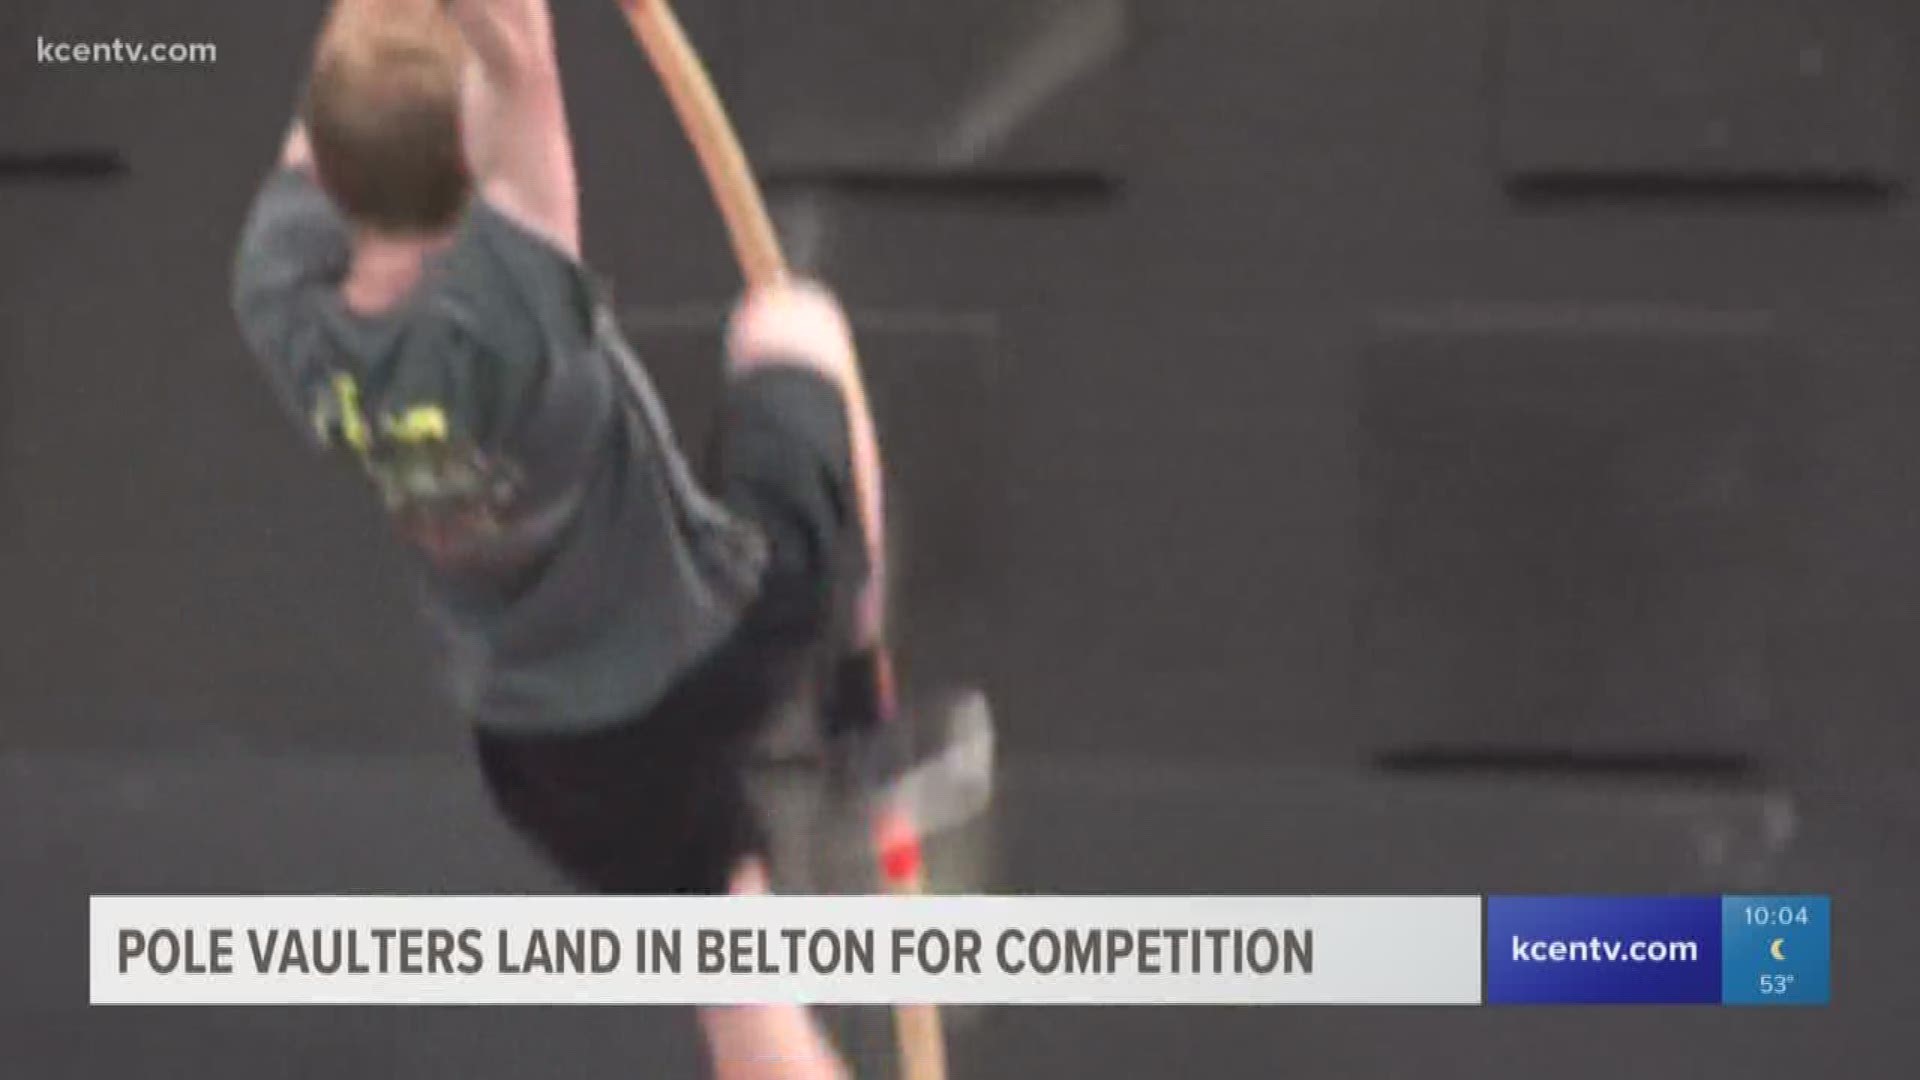 This weekend, the competition will showcase beginners, pros and even athletes in their 70s and 80s. Some vaulters could be jumping over 18 feet.